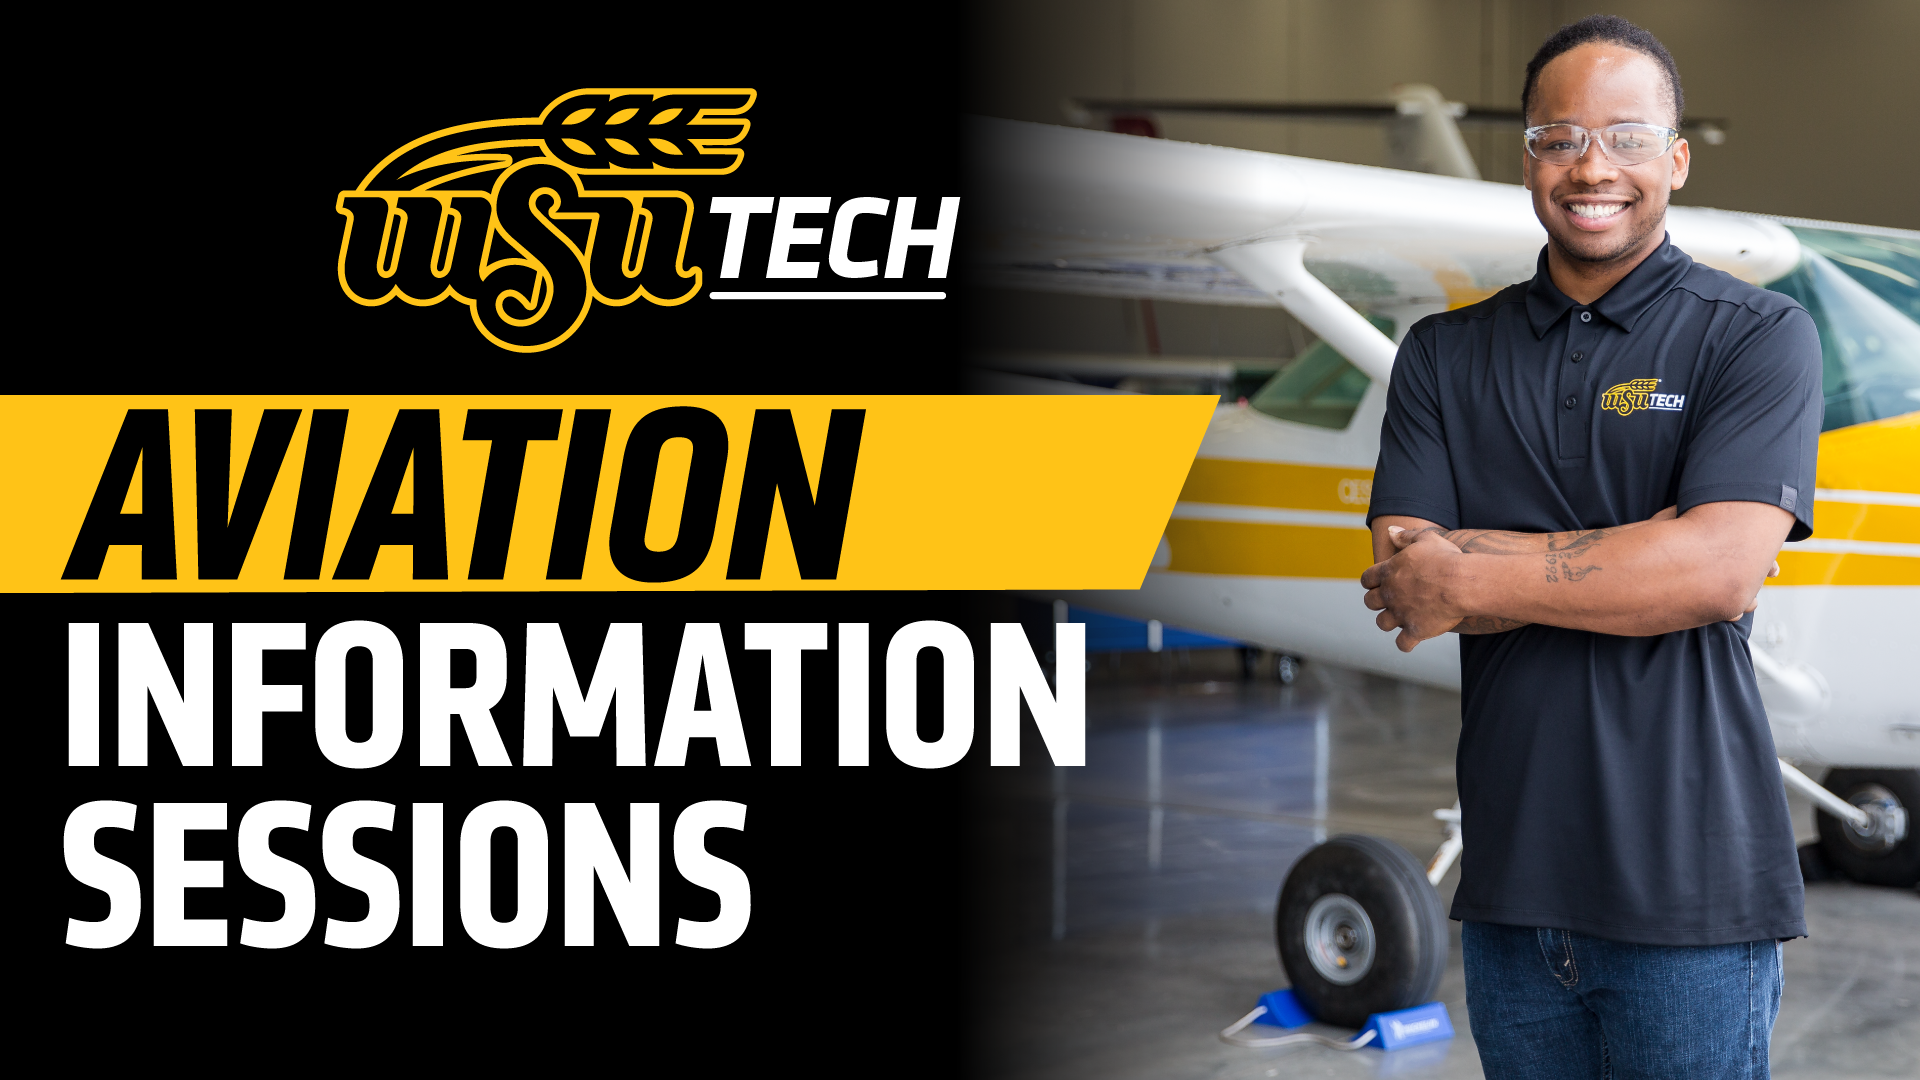 WSU TECH AVIATION INFORMATION SESSION. MAN SMILING IN FRONT OF SMALL PLANE